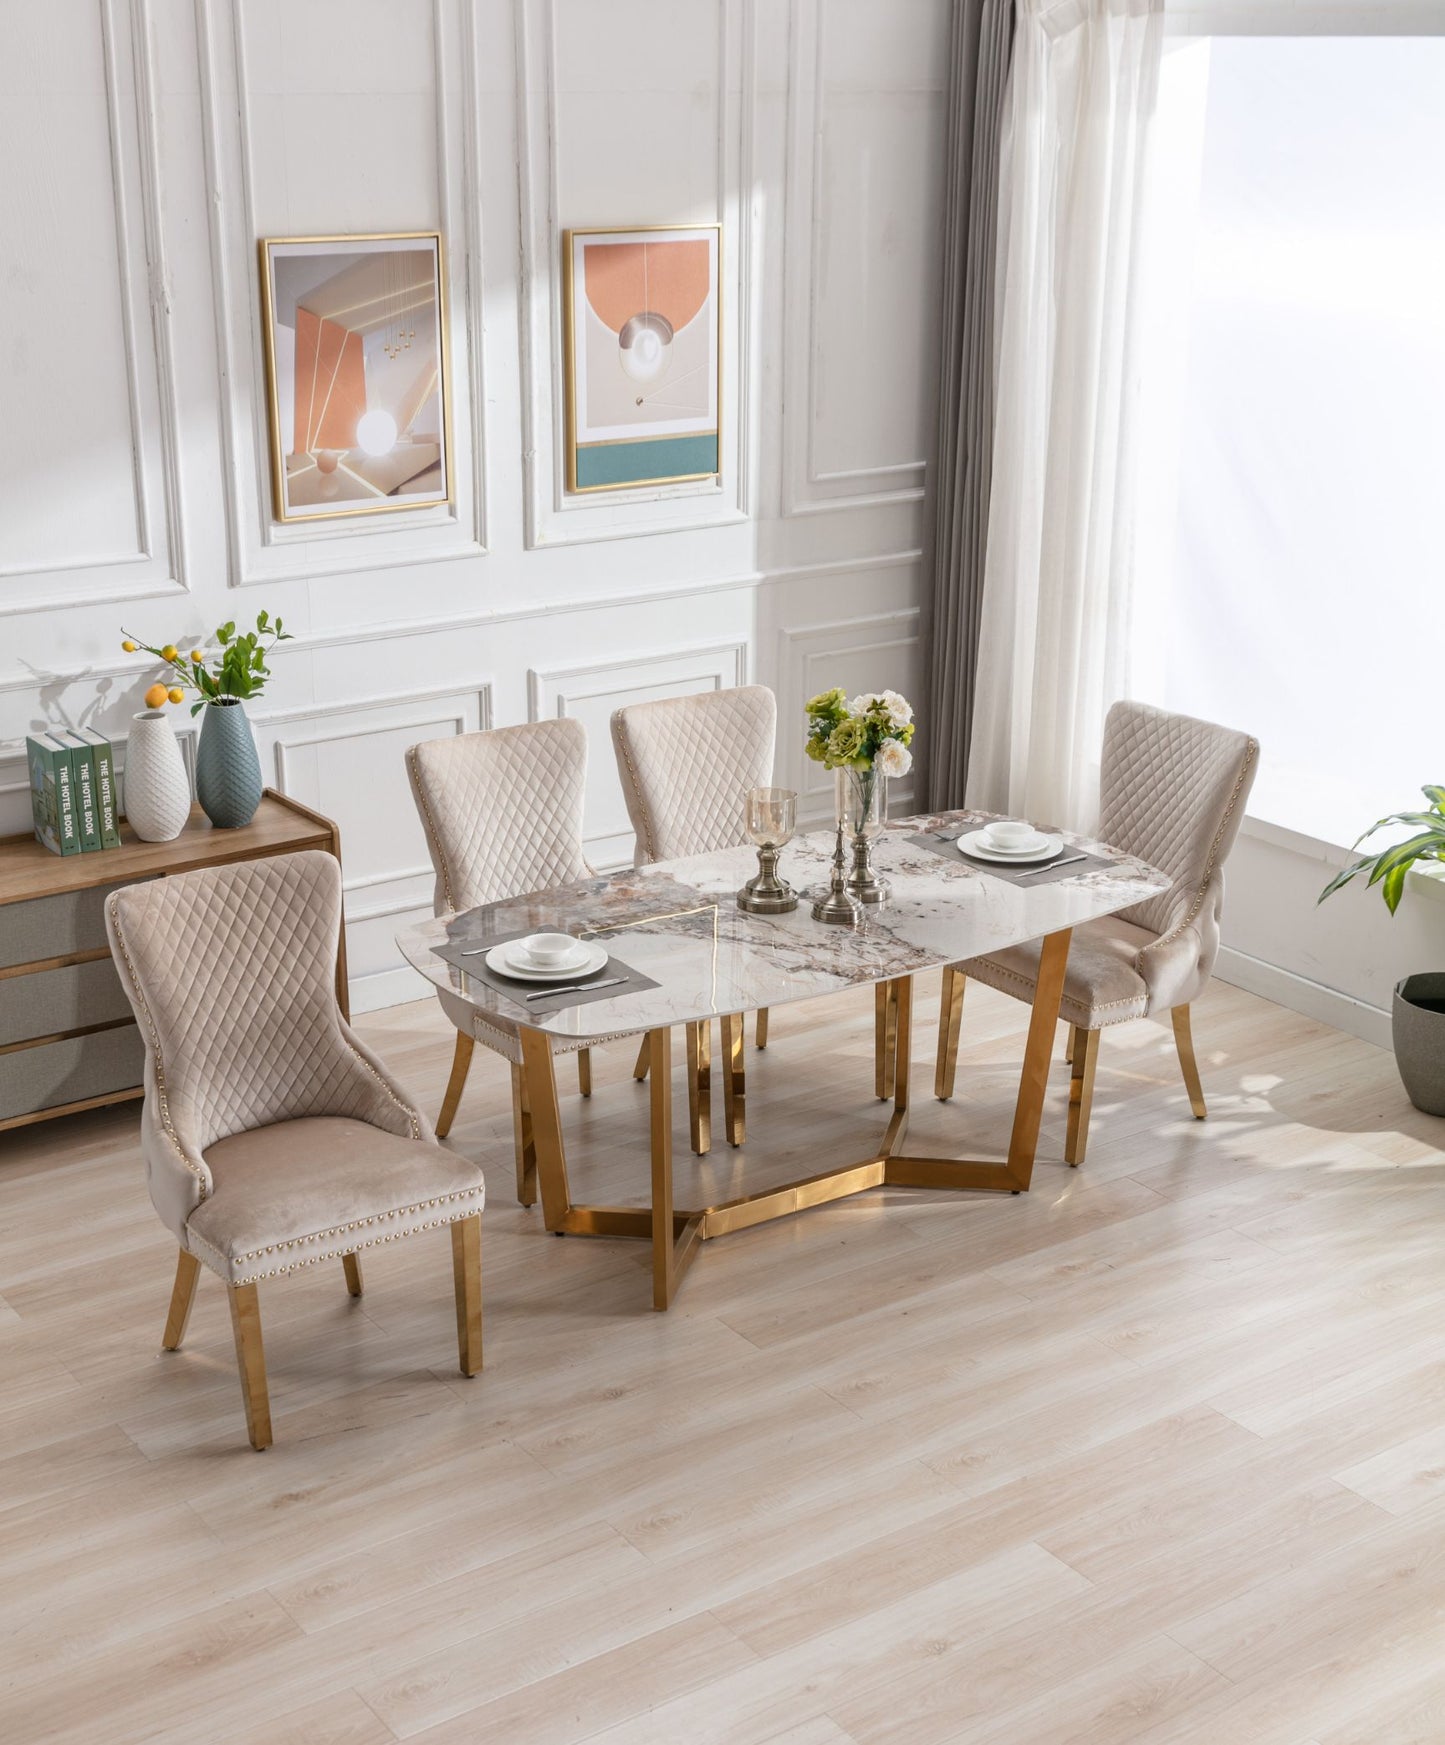 London Oval Ceramic Gold Legs Table High Quality Dining Table